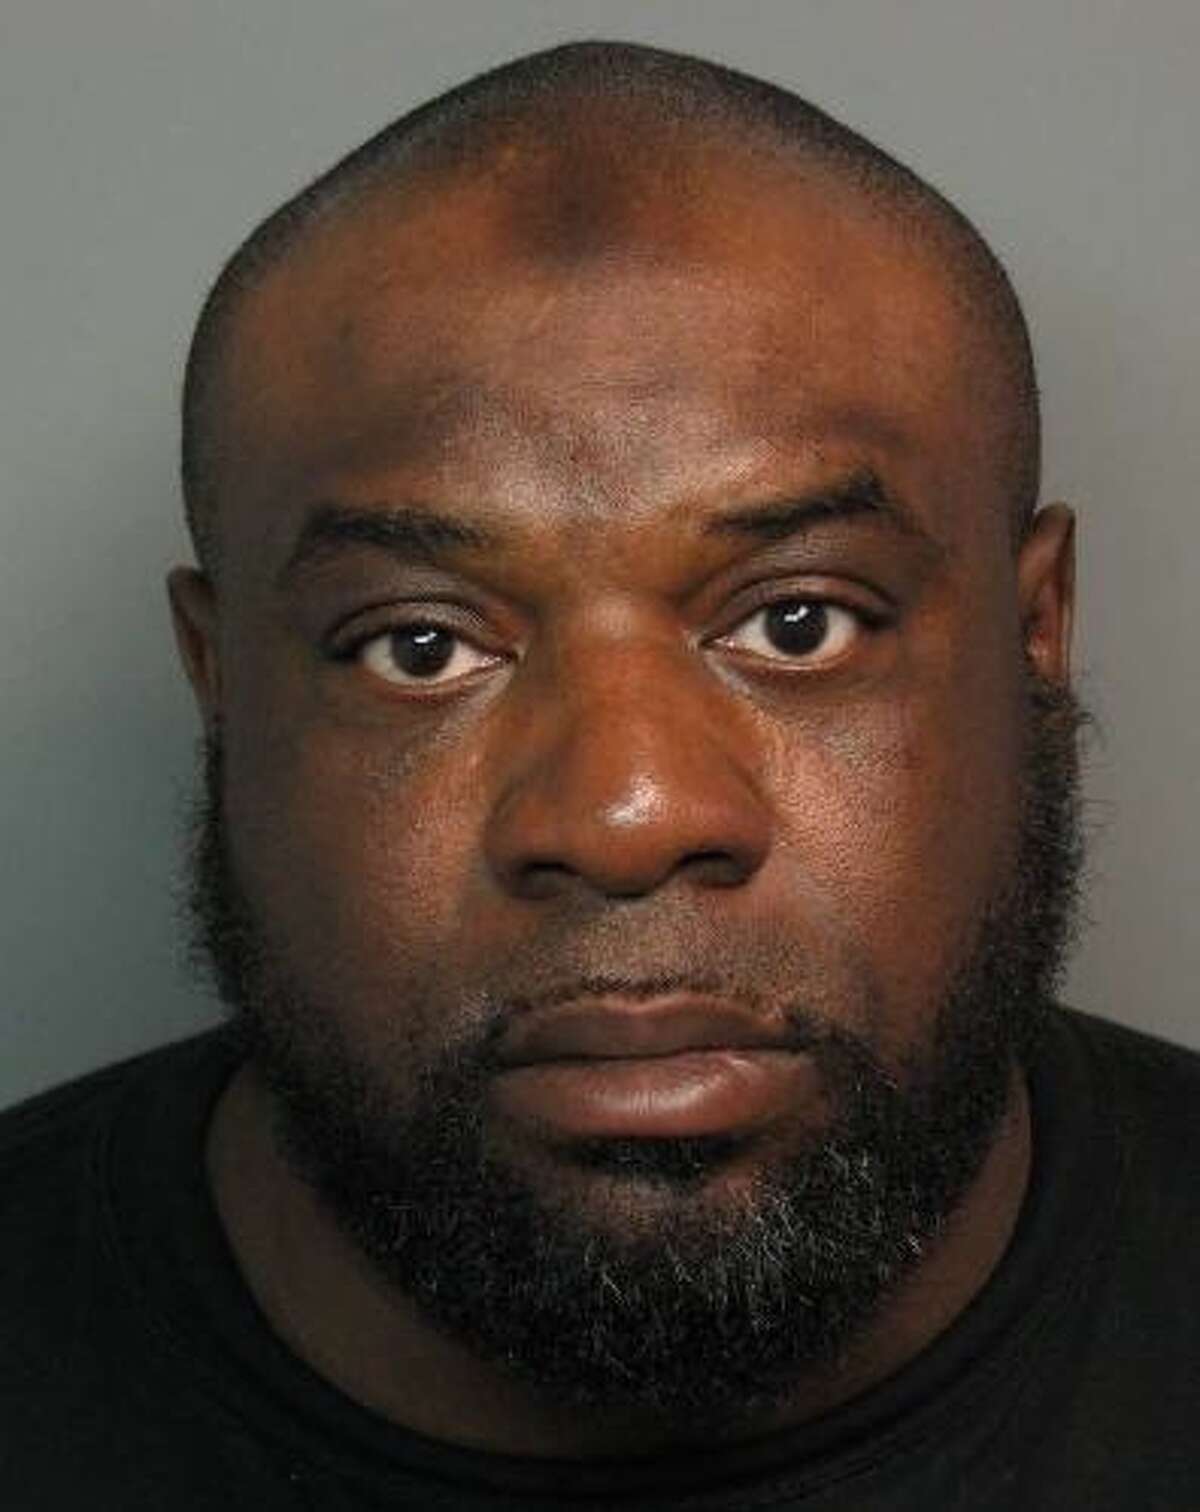 Robert L. Williams, 41, Albany, is wanted for questioning about the death of his wife, Sharene Wallace, 37, of 279 Sherman St. She was found dead in her apartment on Wednesday, May 29, 2013. (Albany Police Department)